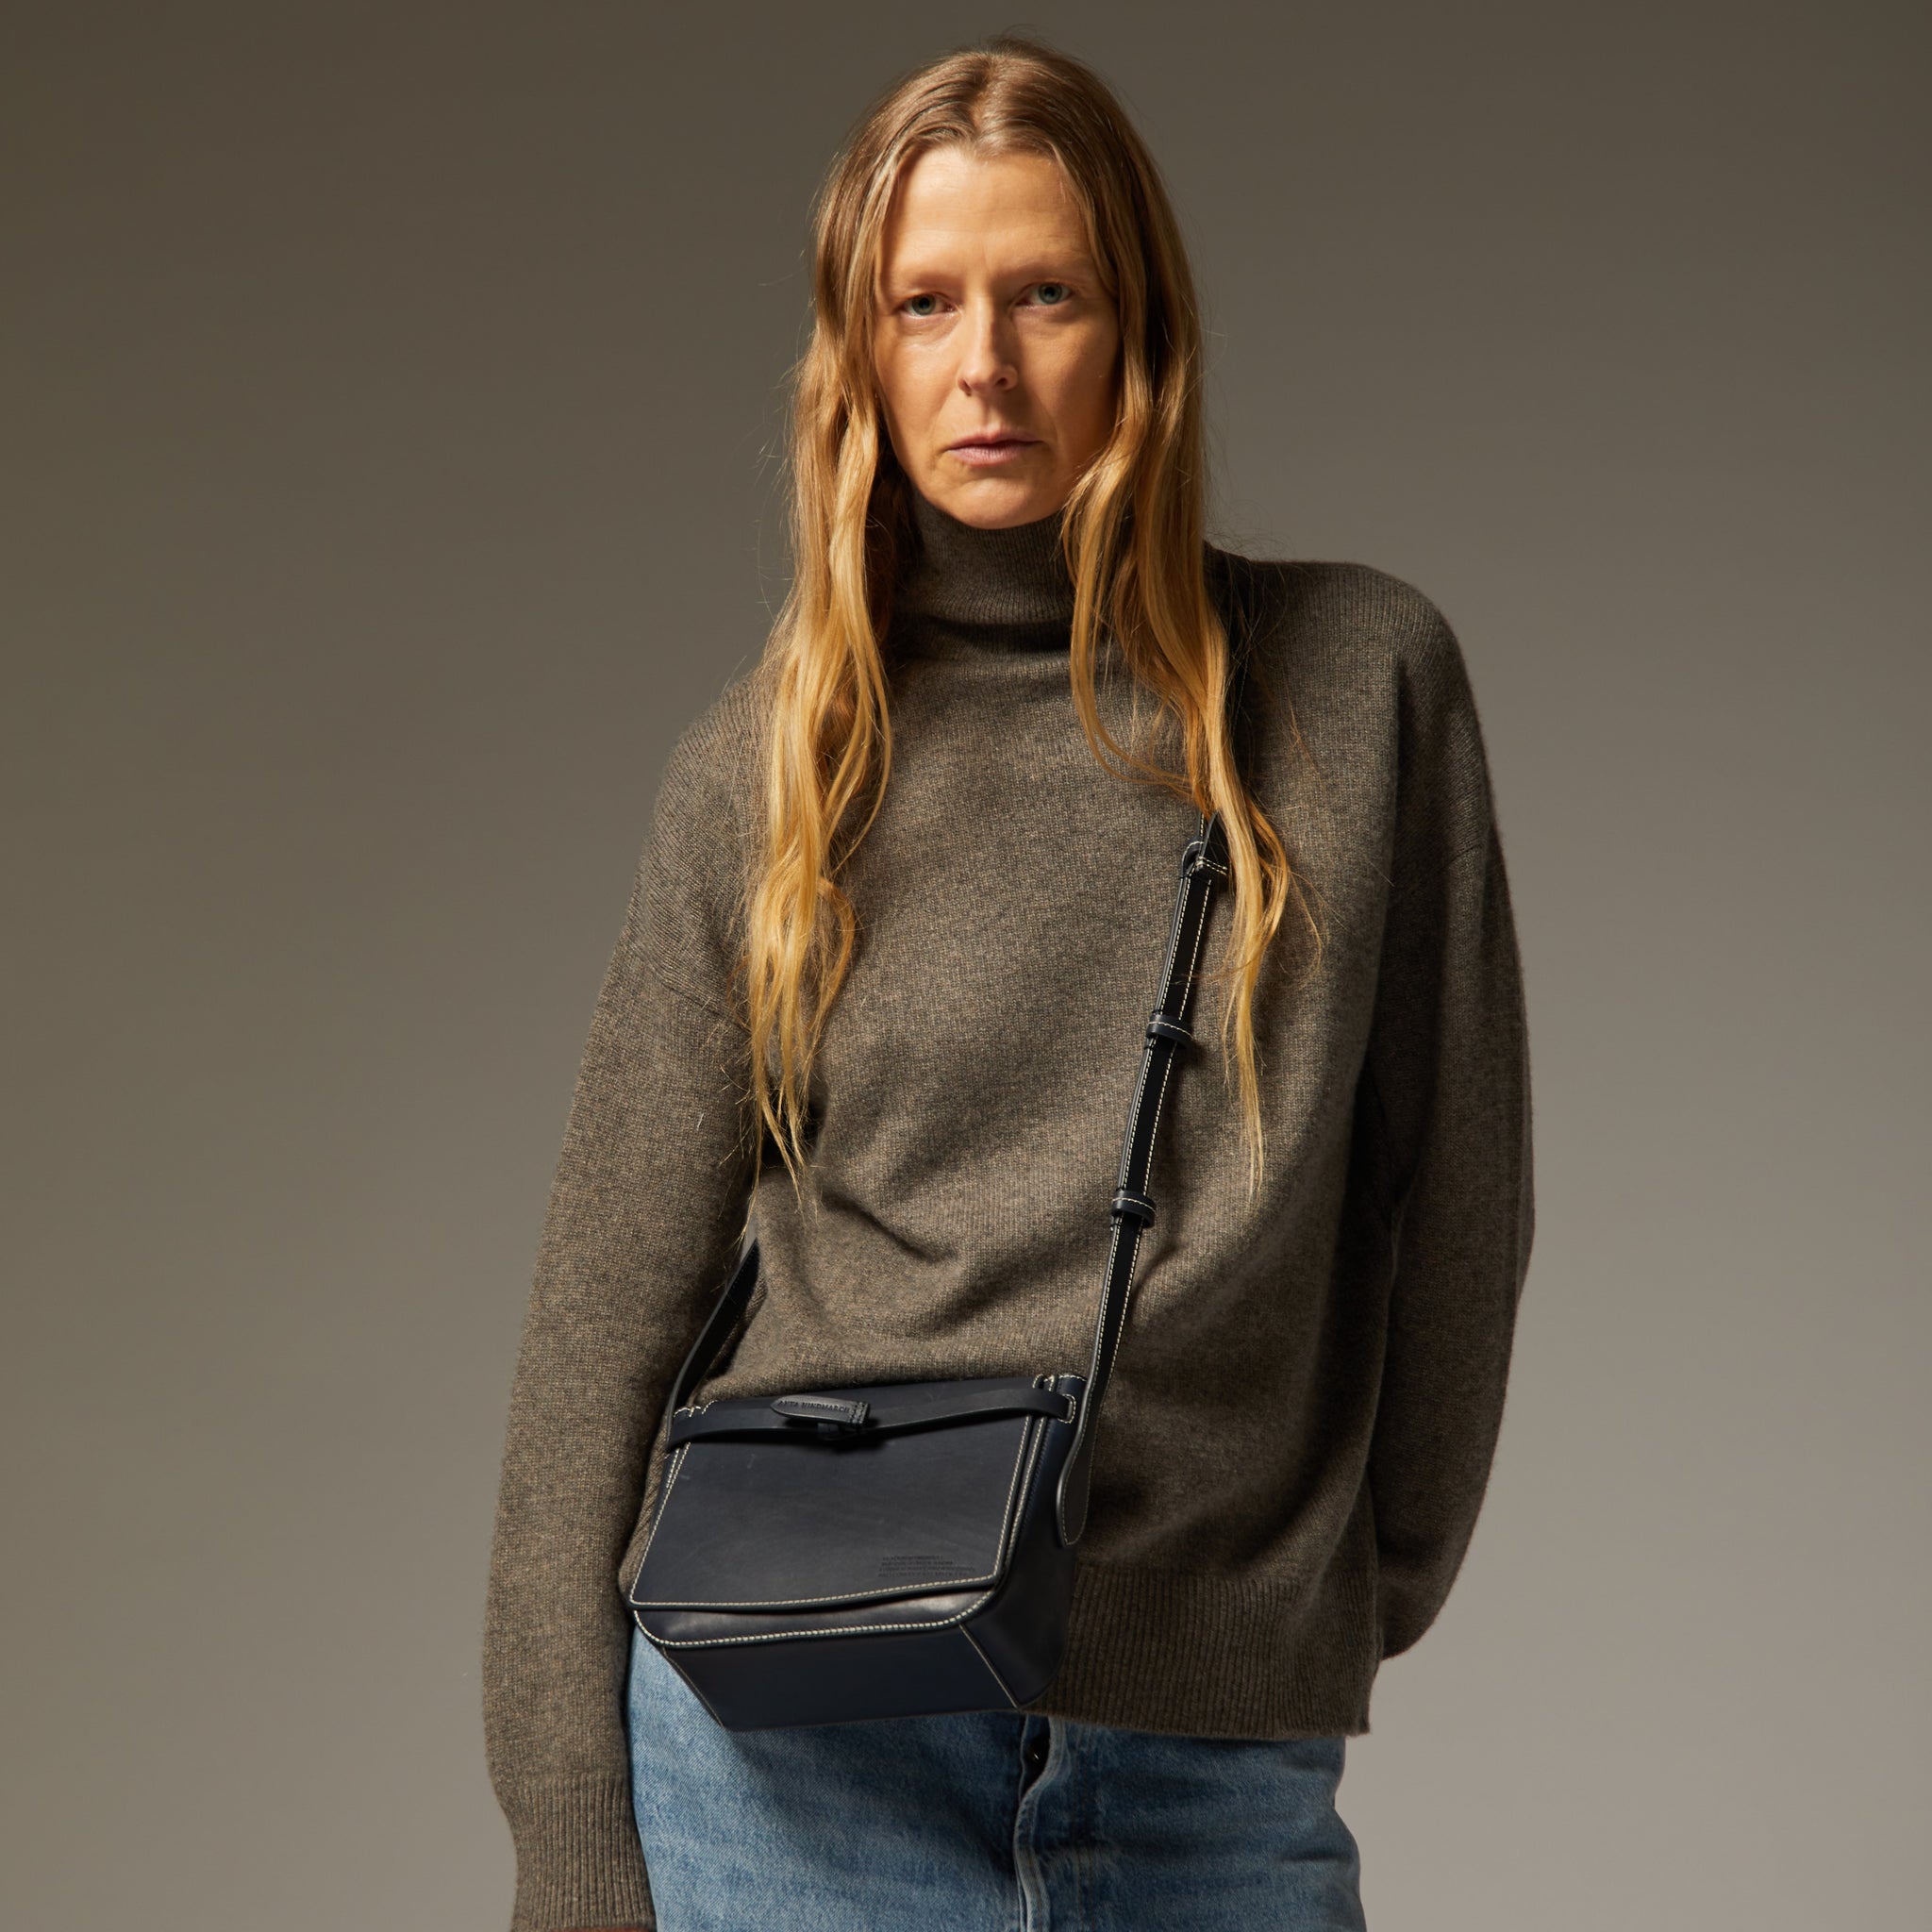 Return to Nature Cross-body -

                  
                    Compostable Leather in Marine -
                  

                  Anya Hindmarch UK
